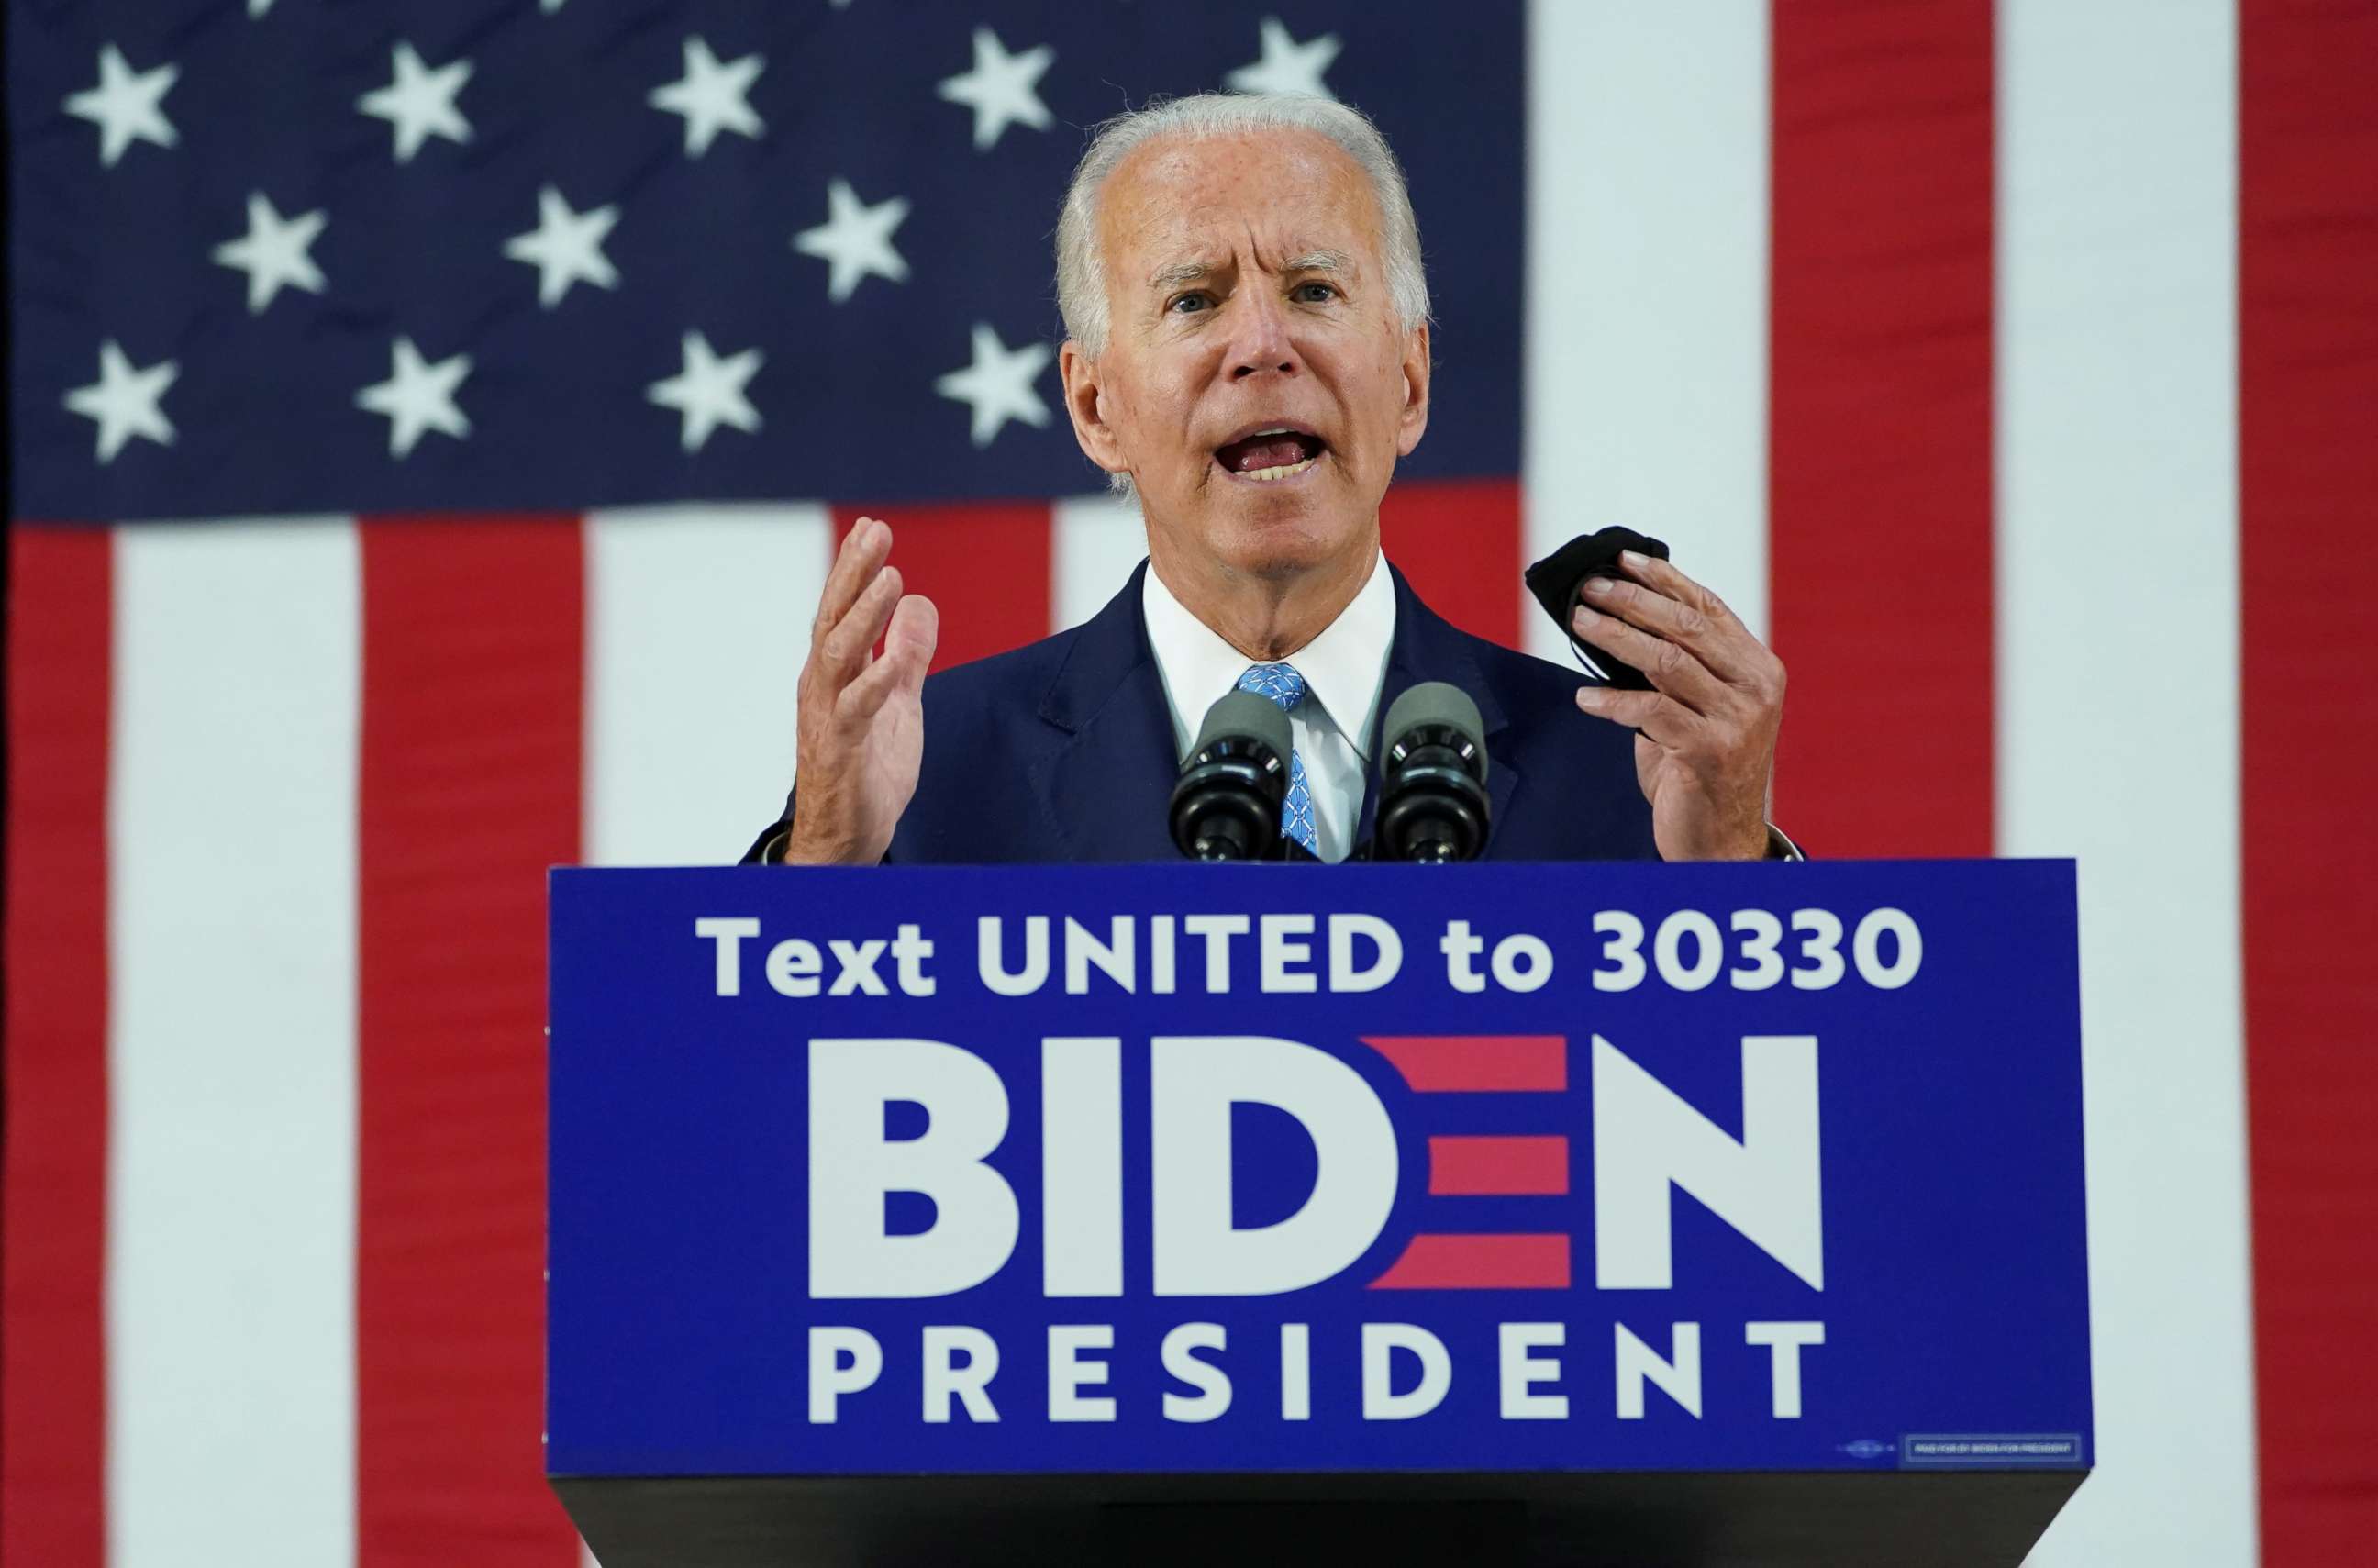 PHOTO: Former Vice President Joe Biden holds his protective face mask as he speaks about the Trump administration's handling of the coronavirus pandemic during a campaign event in Wilmington, Del., June 30, 2020.